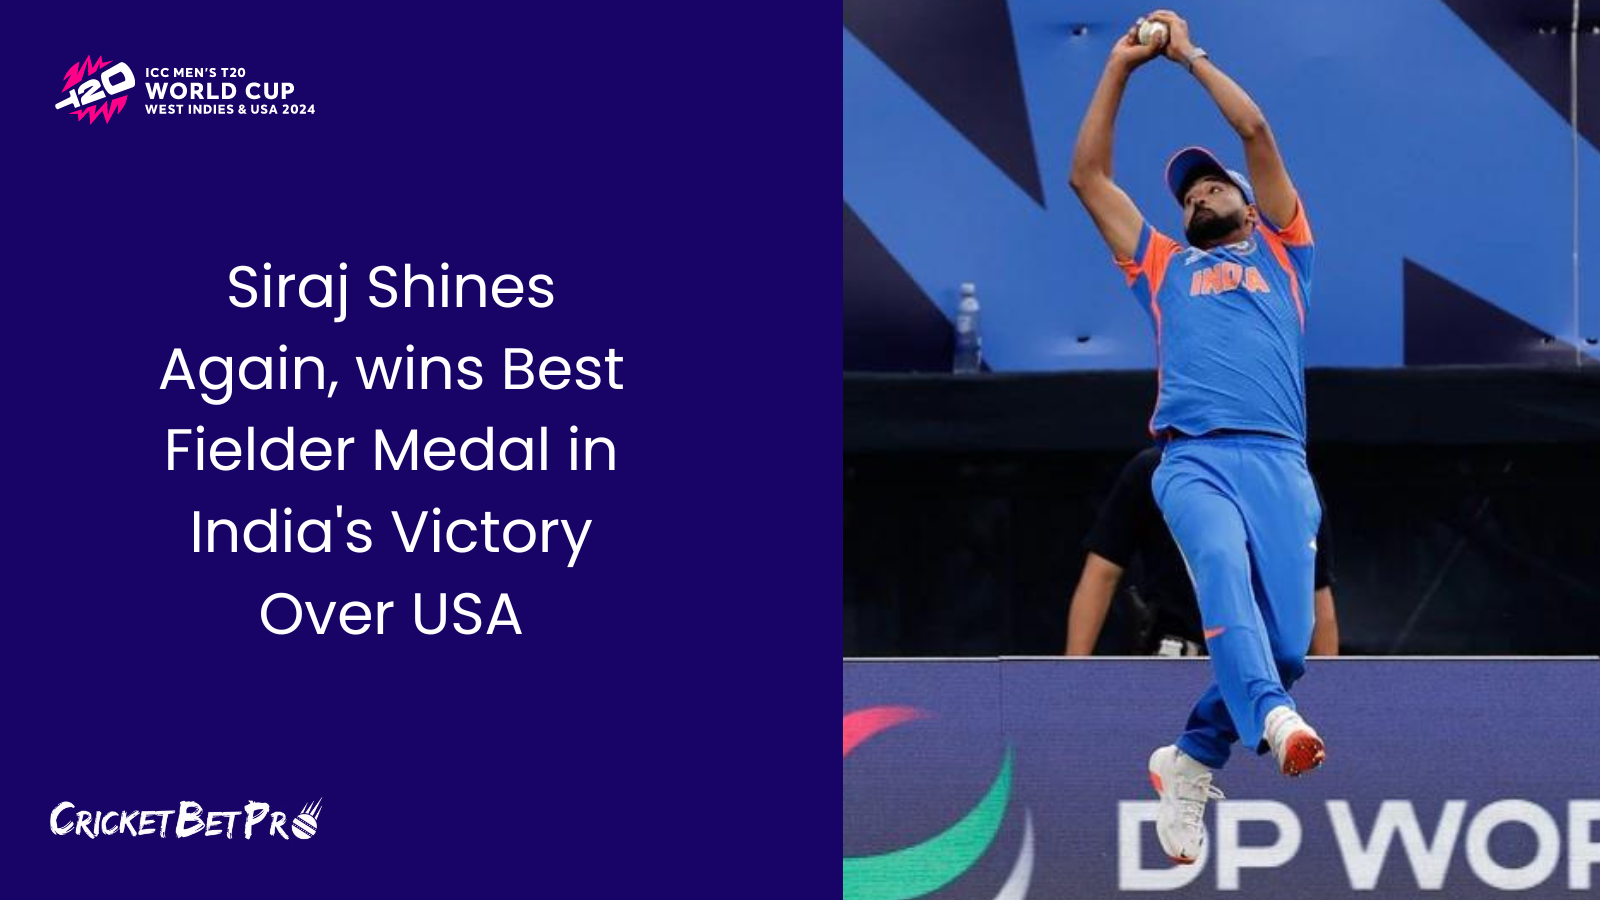 Siraj Shines Again, wins Best Fielder Medal in India's Victory Over USA.png